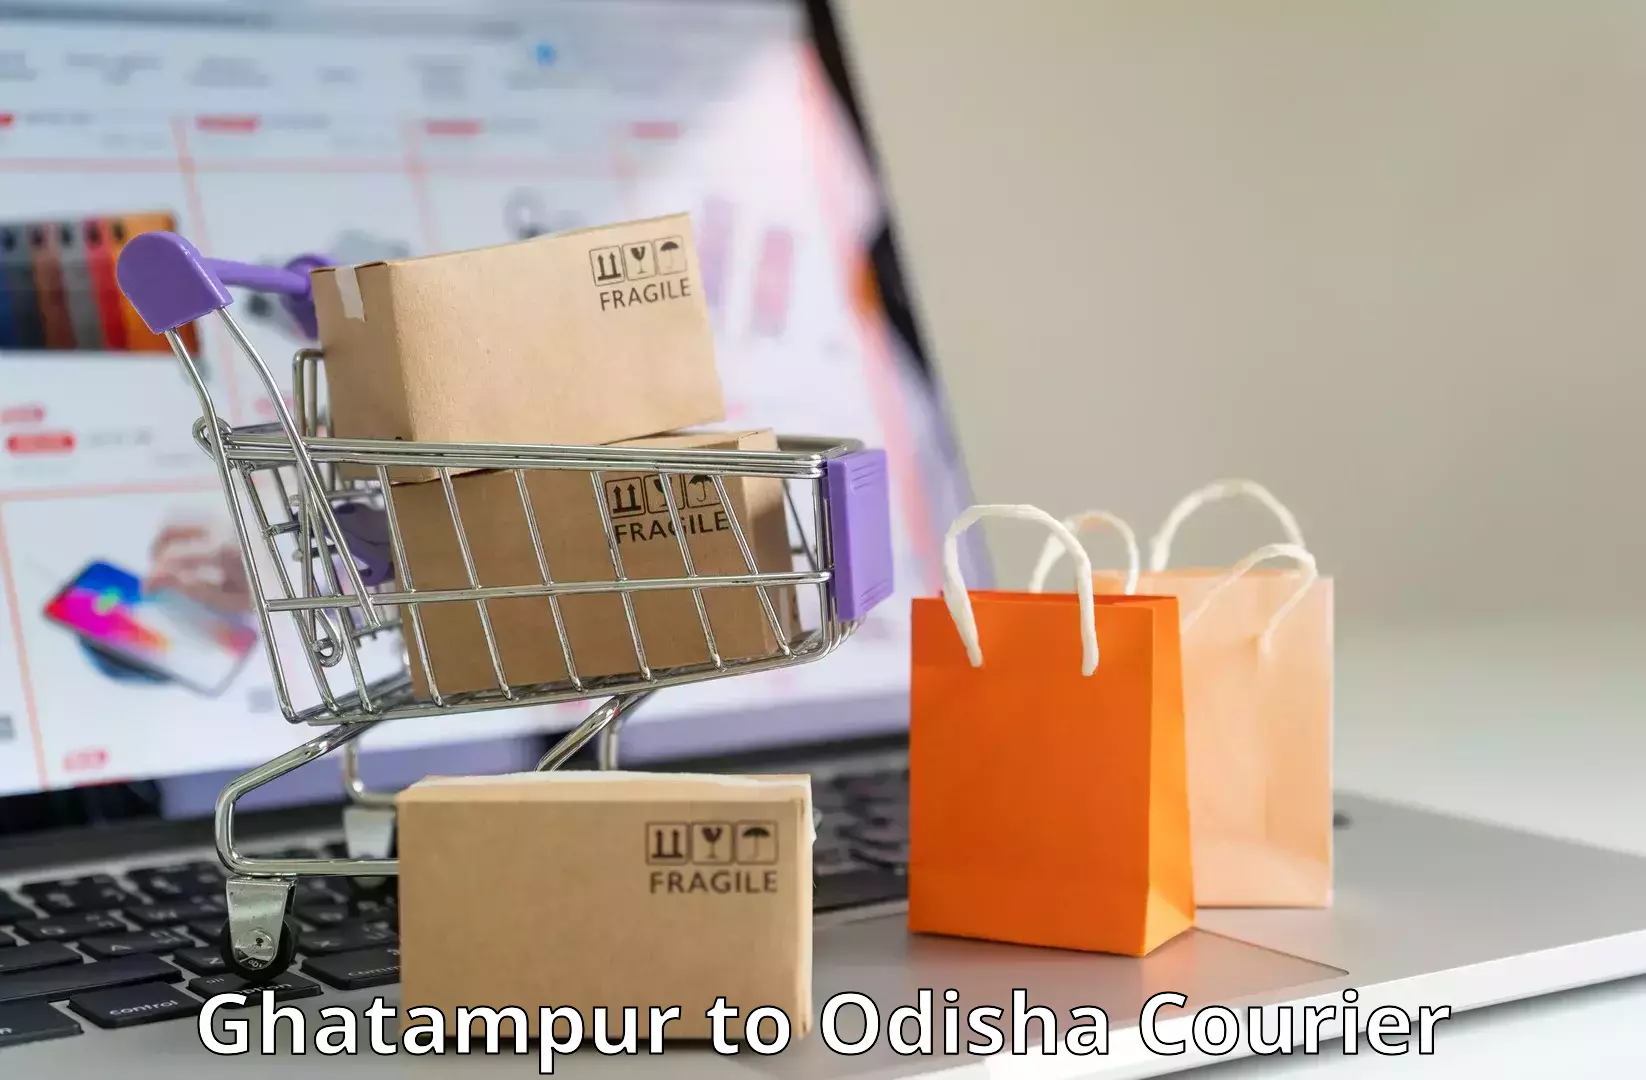 Easy access courier services in Ghatampur to Odisha